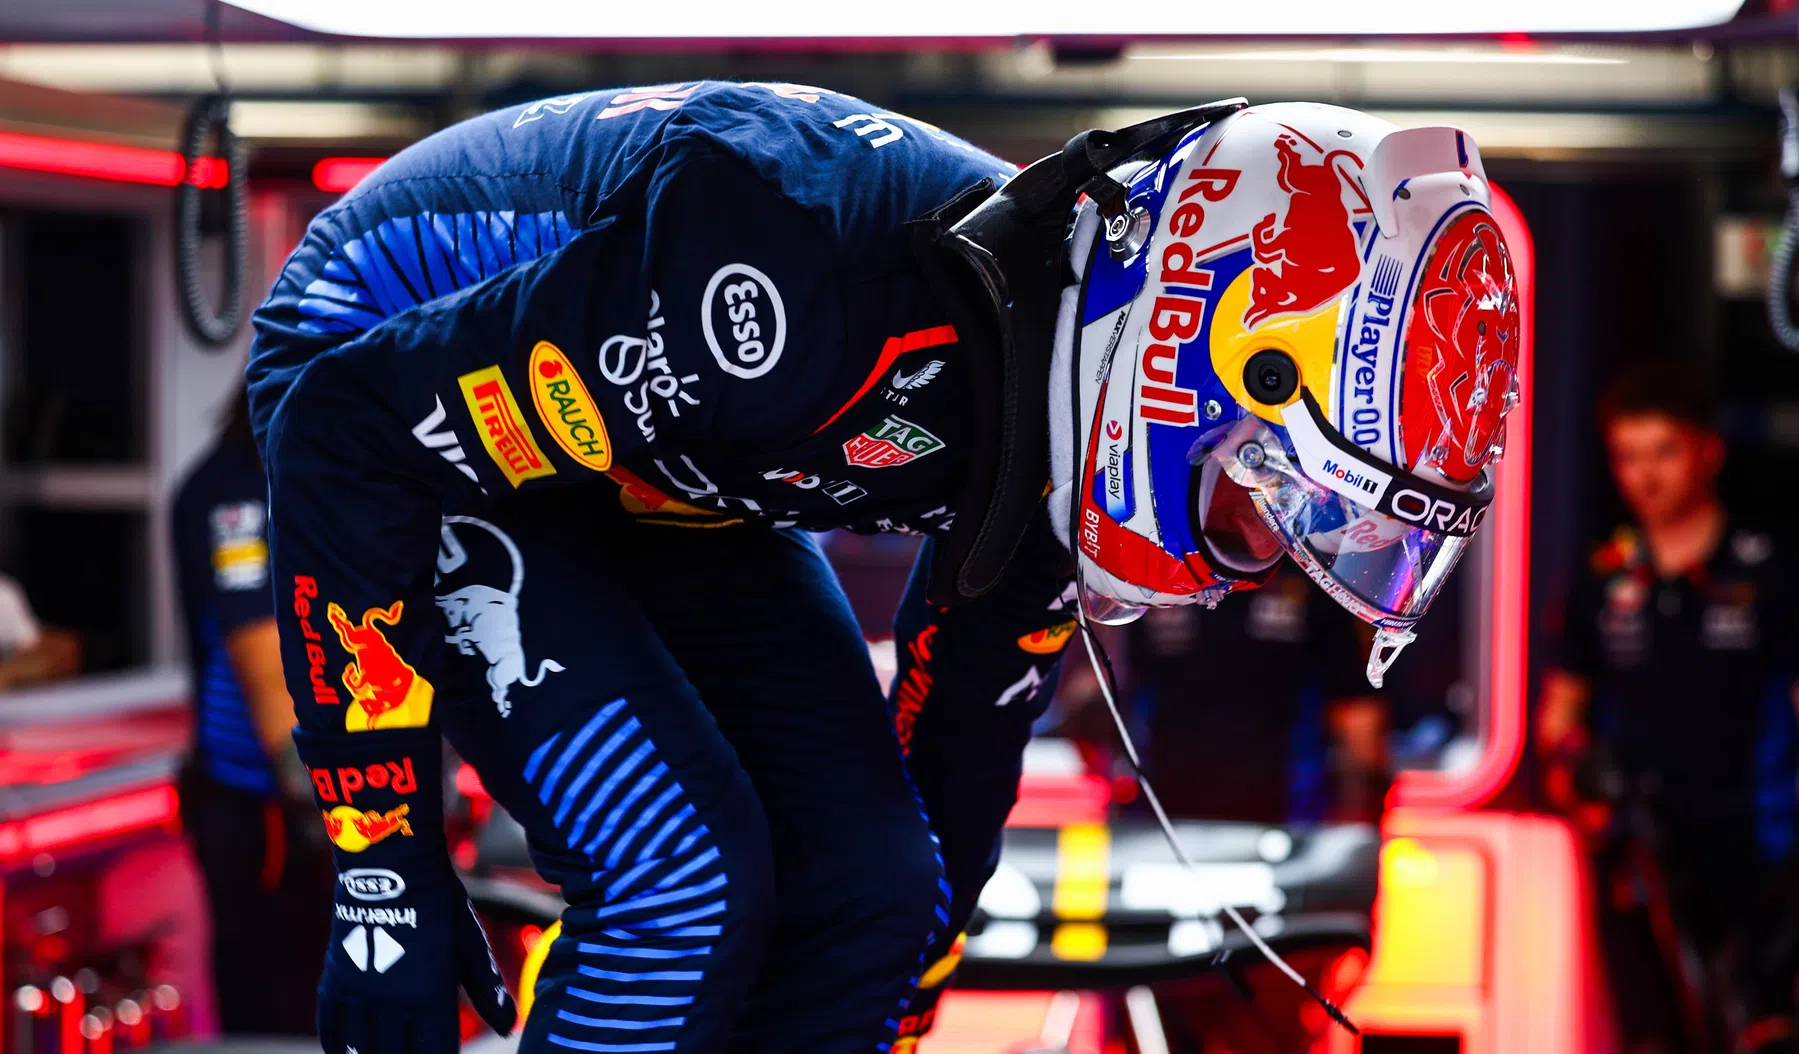 Verstappen not happy with another messy weekend